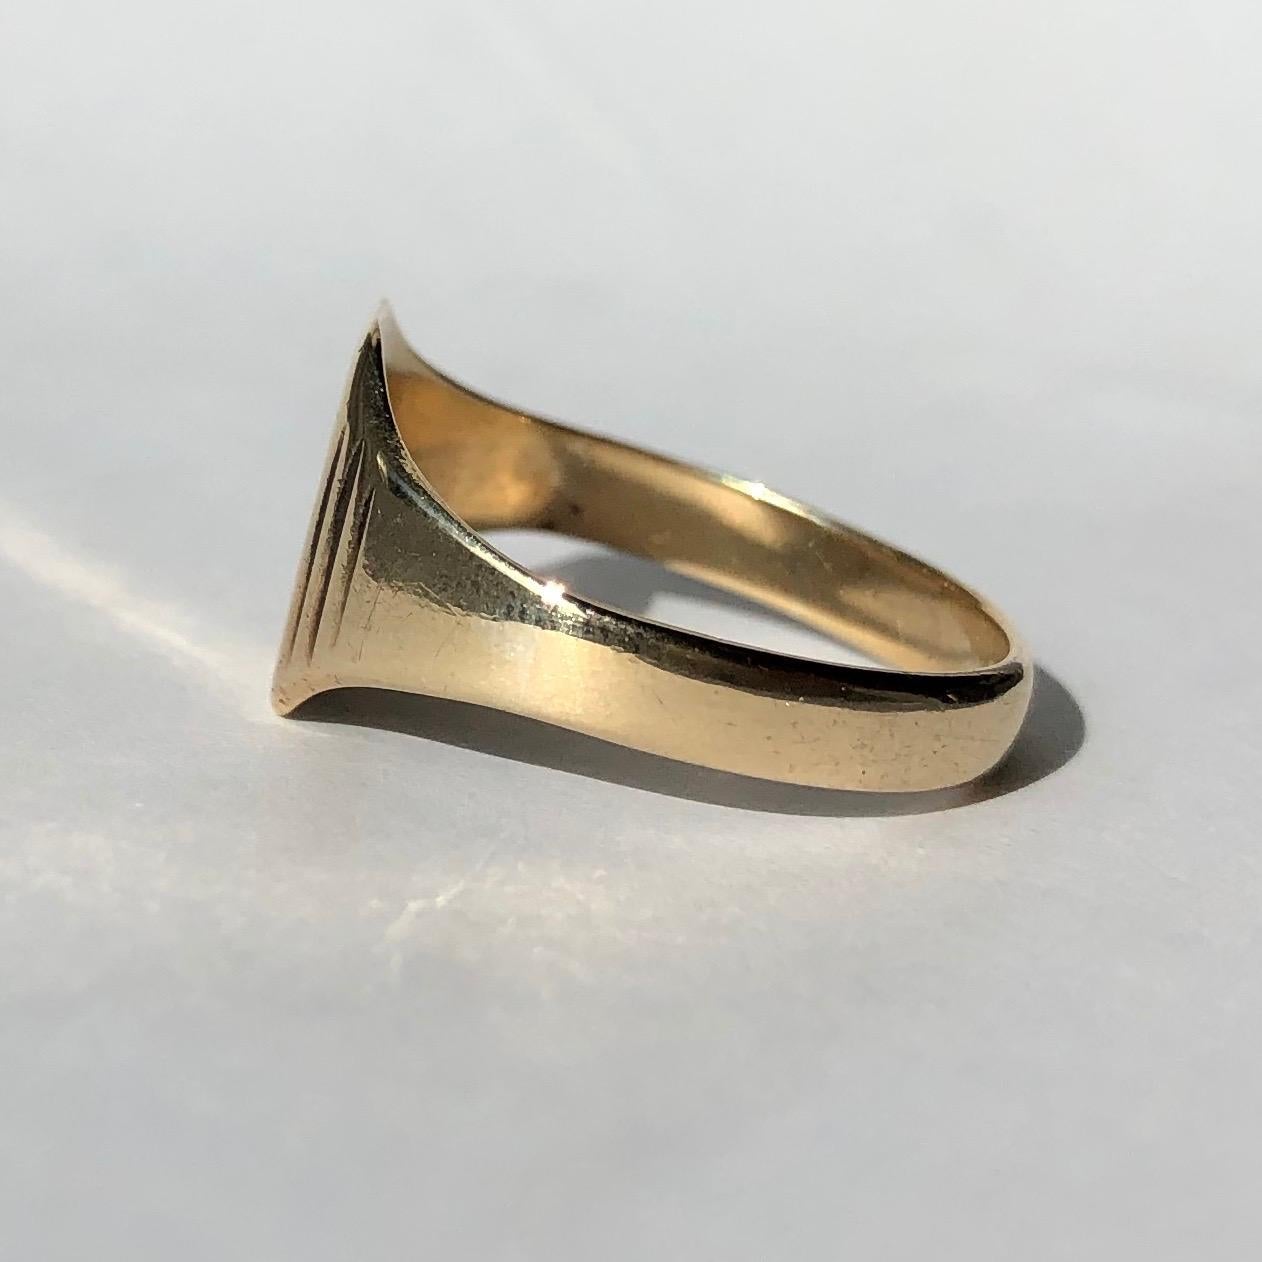 This signet ring is the classic soft octagon shape and is modelled in 9ct gold. The face has initials reading 'AR' or 'RA'. 

Size: Q 1/2 or 8 1/2
Face Dimensions: 9x11mm 

Weight: 2.82g